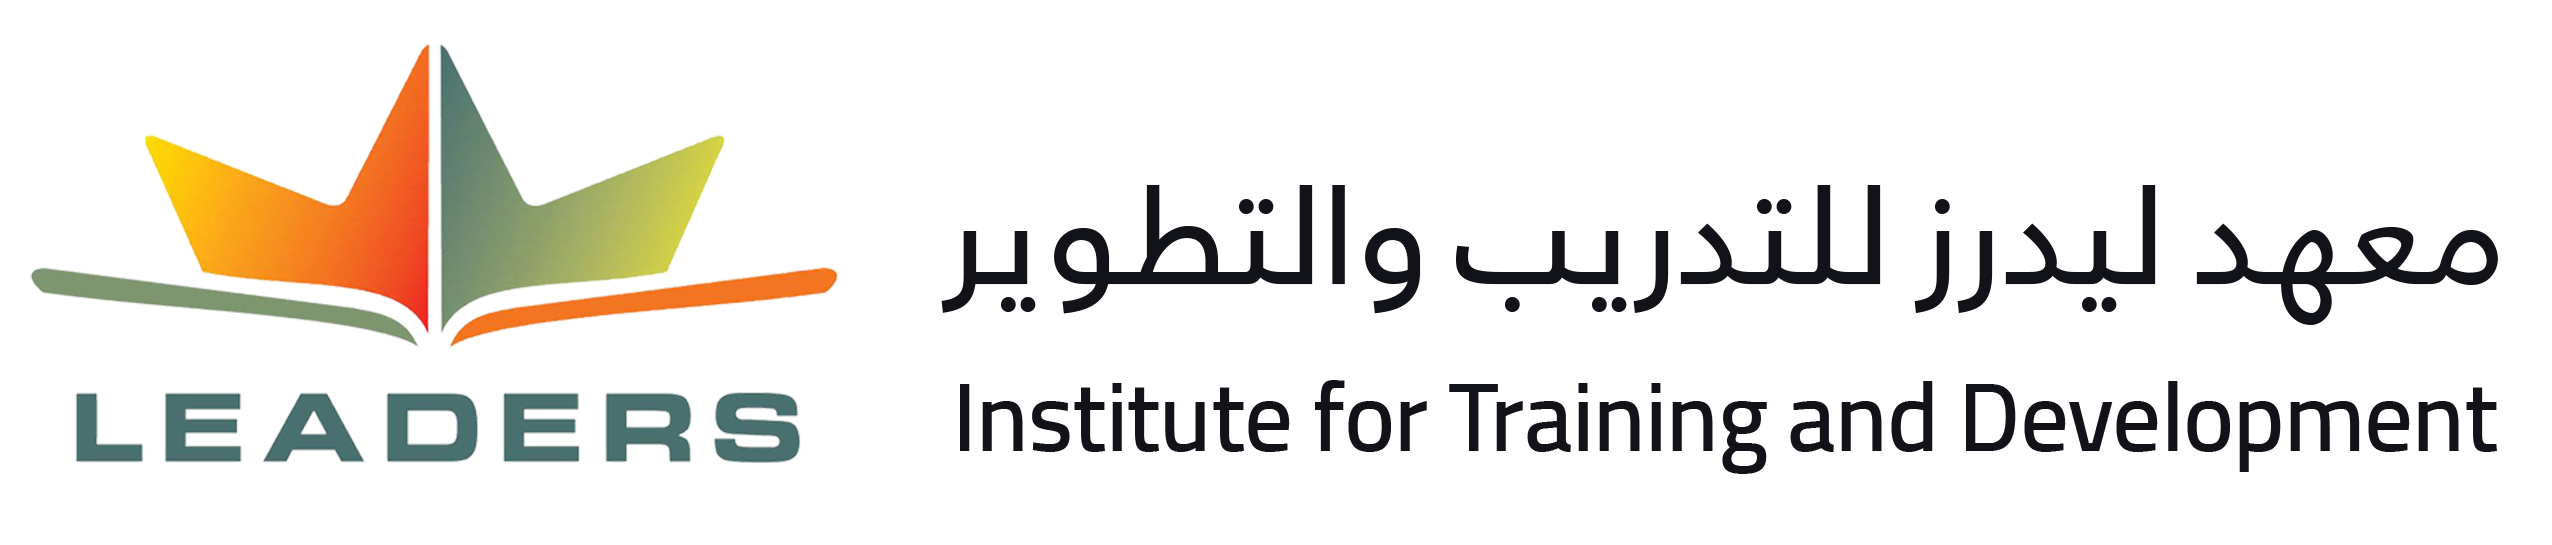 Leaders Institute for Training and Development